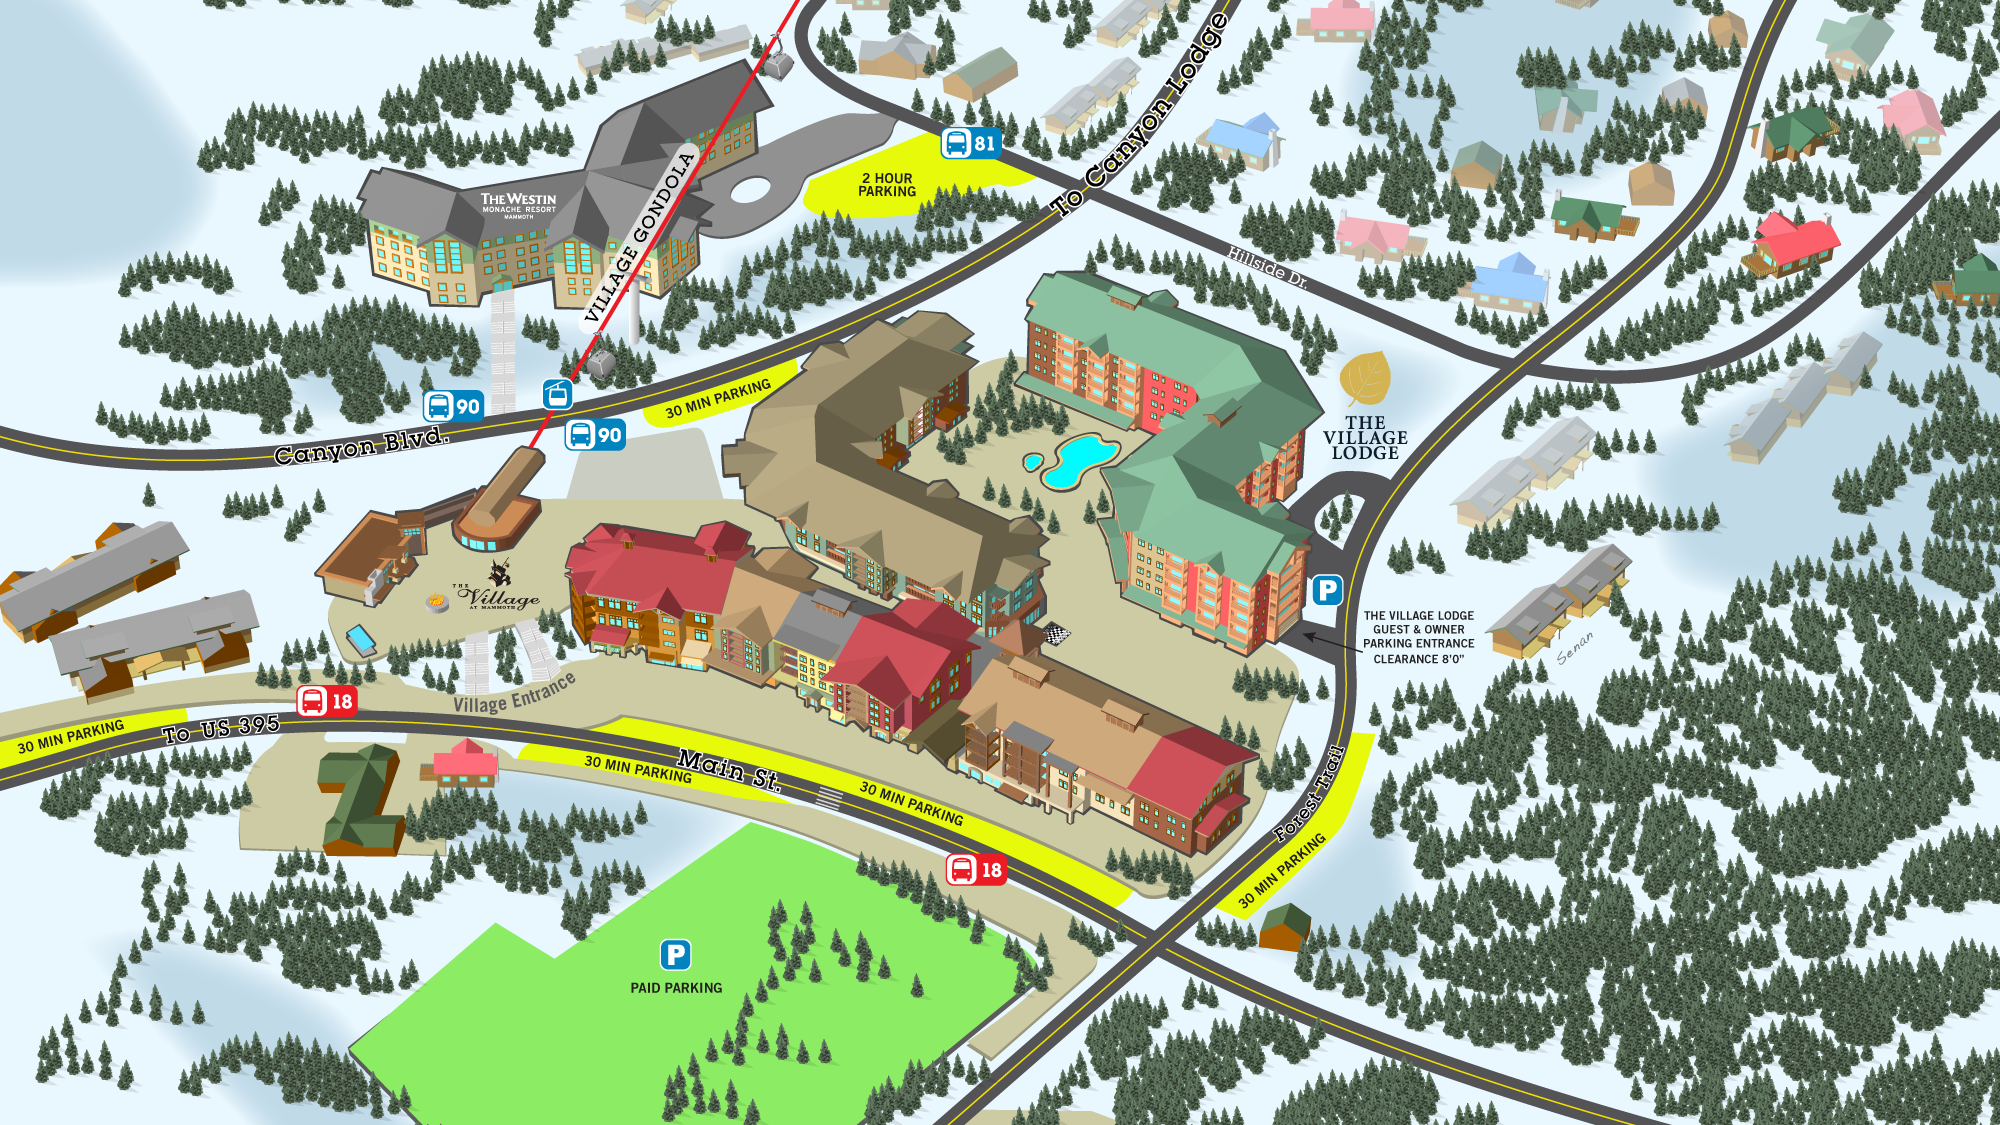 The Village at Mammoth parking map